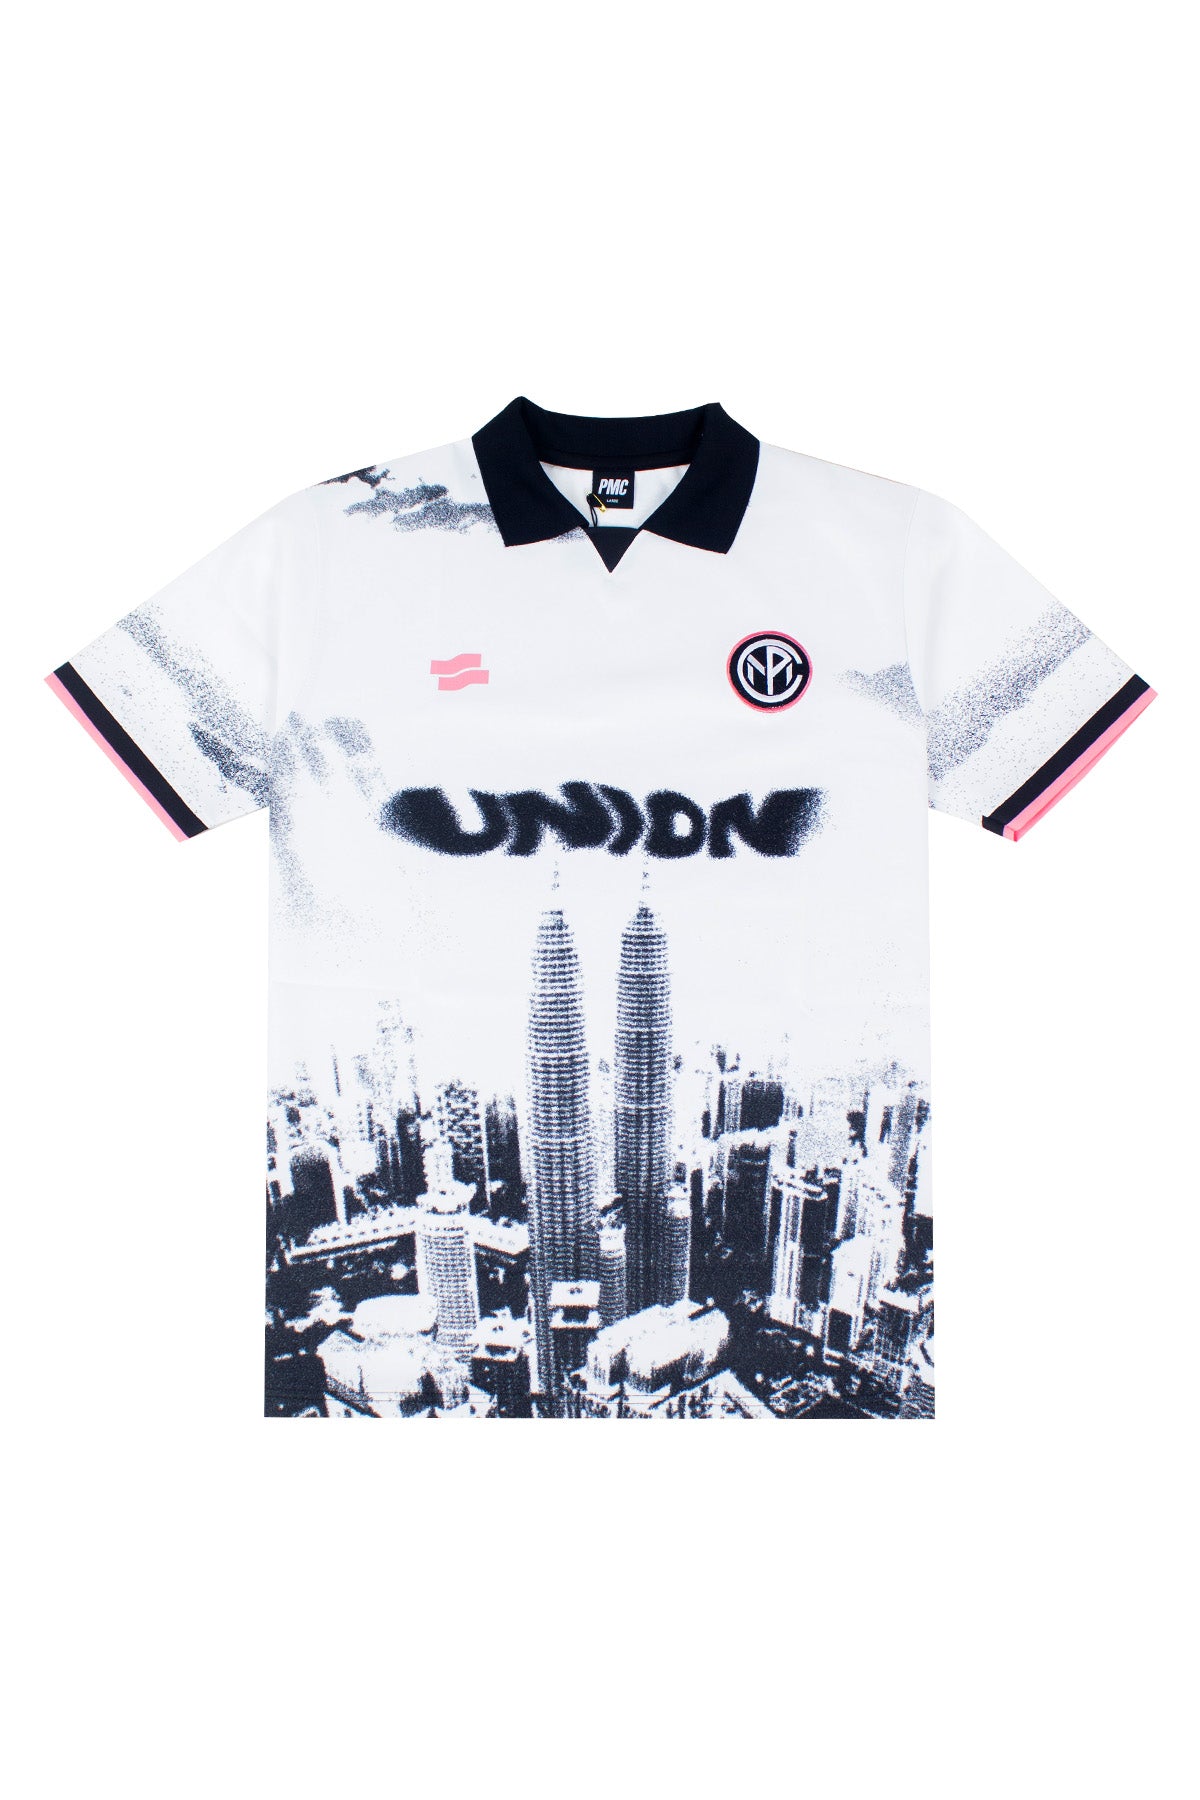 The Union Jersey White